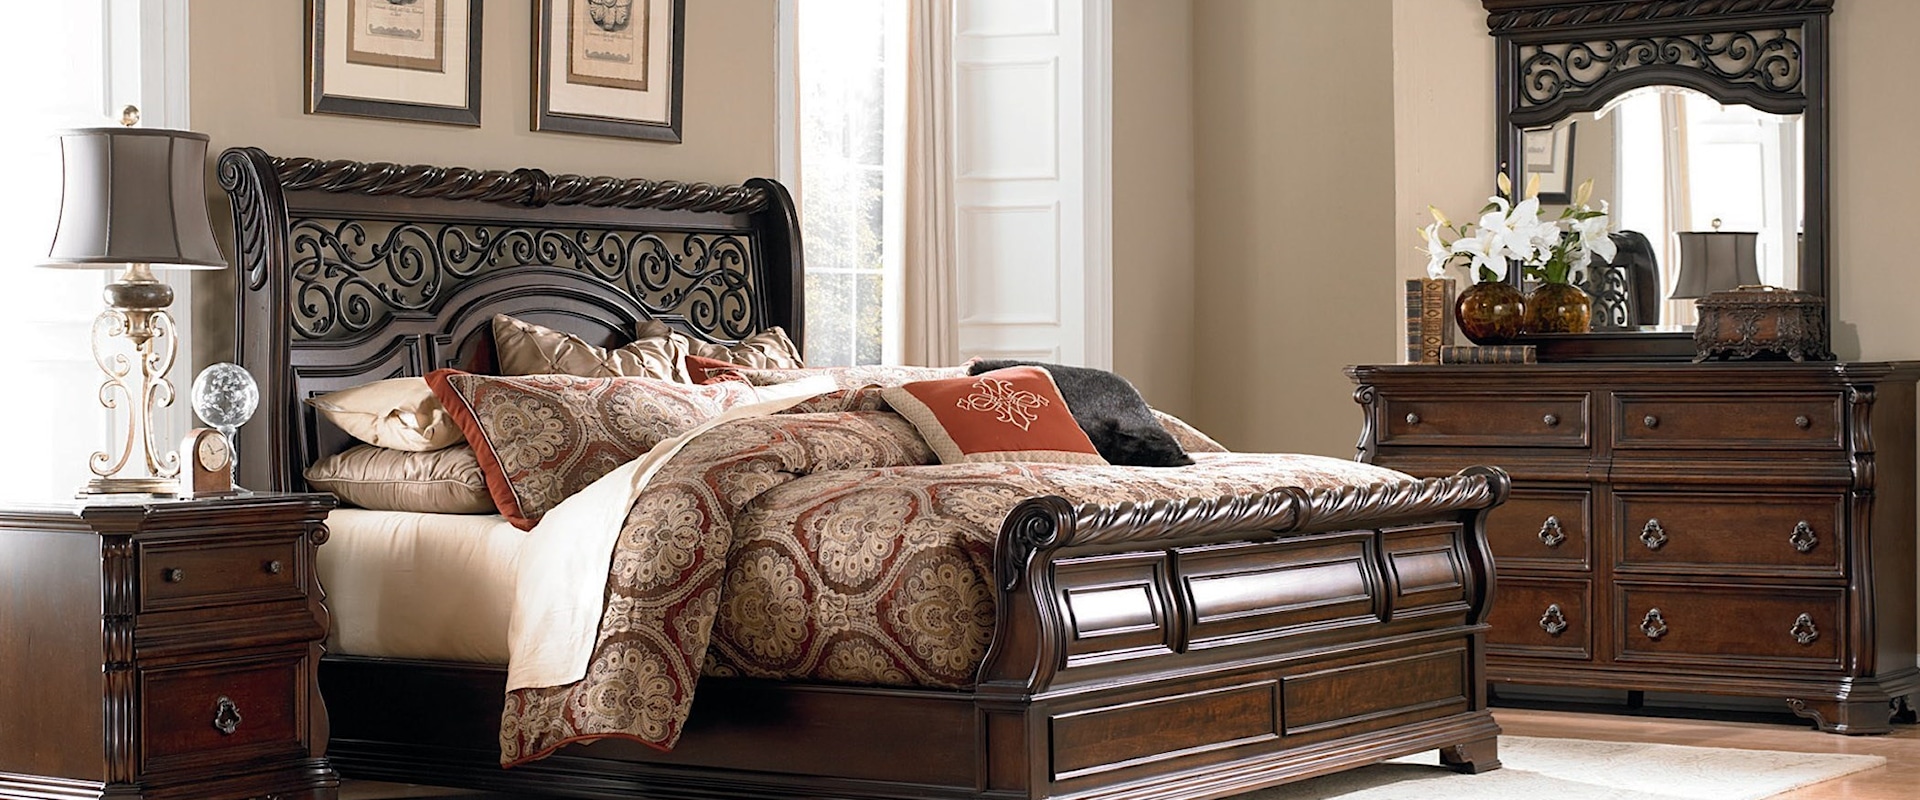 Traditional 4-Piece Queen Bedroom Set with Felt Lined Drawers